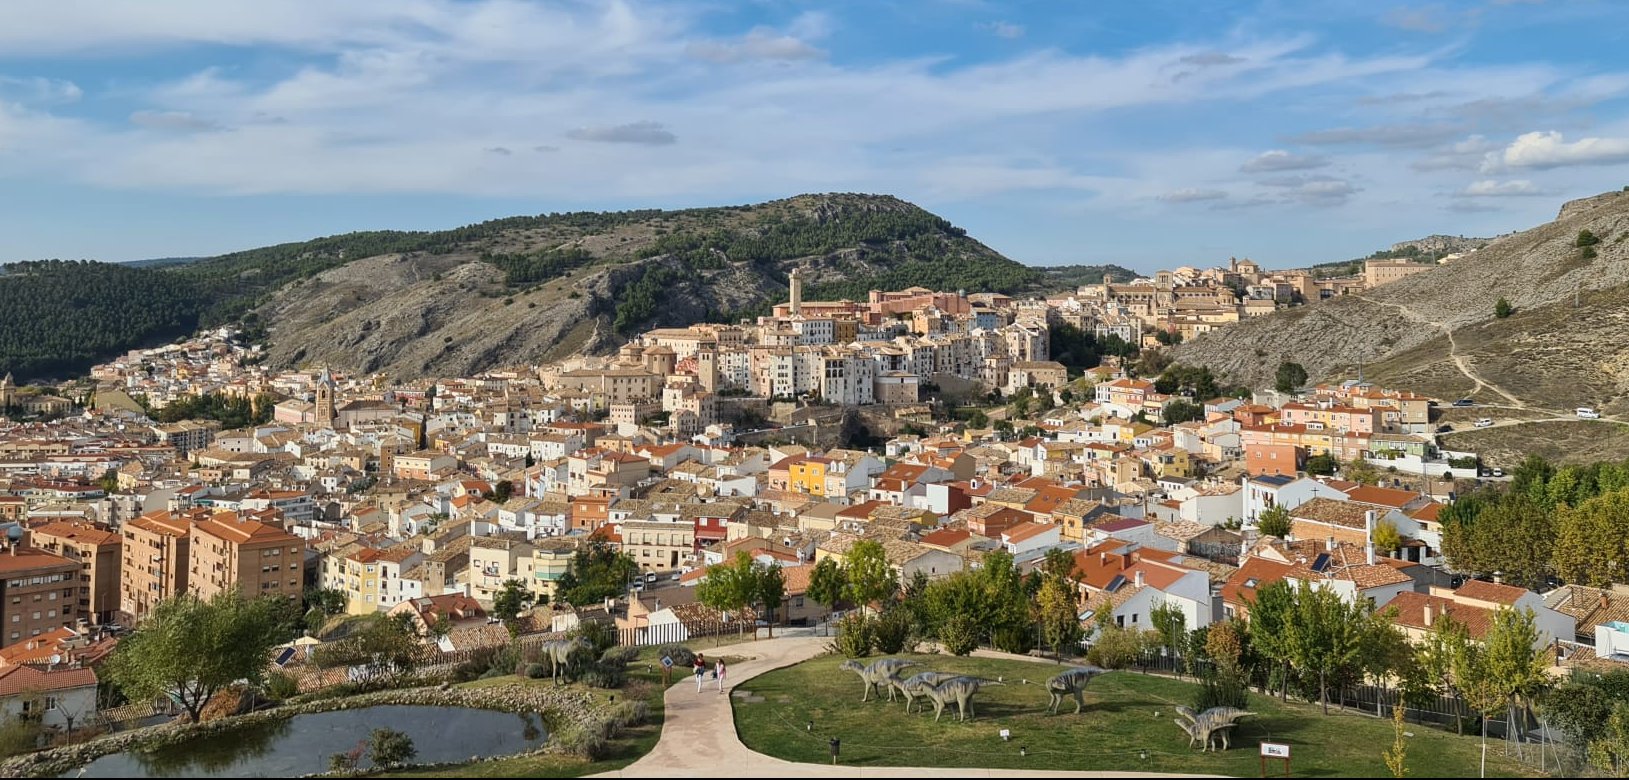 How to go to Cuenca by train from Madrid?